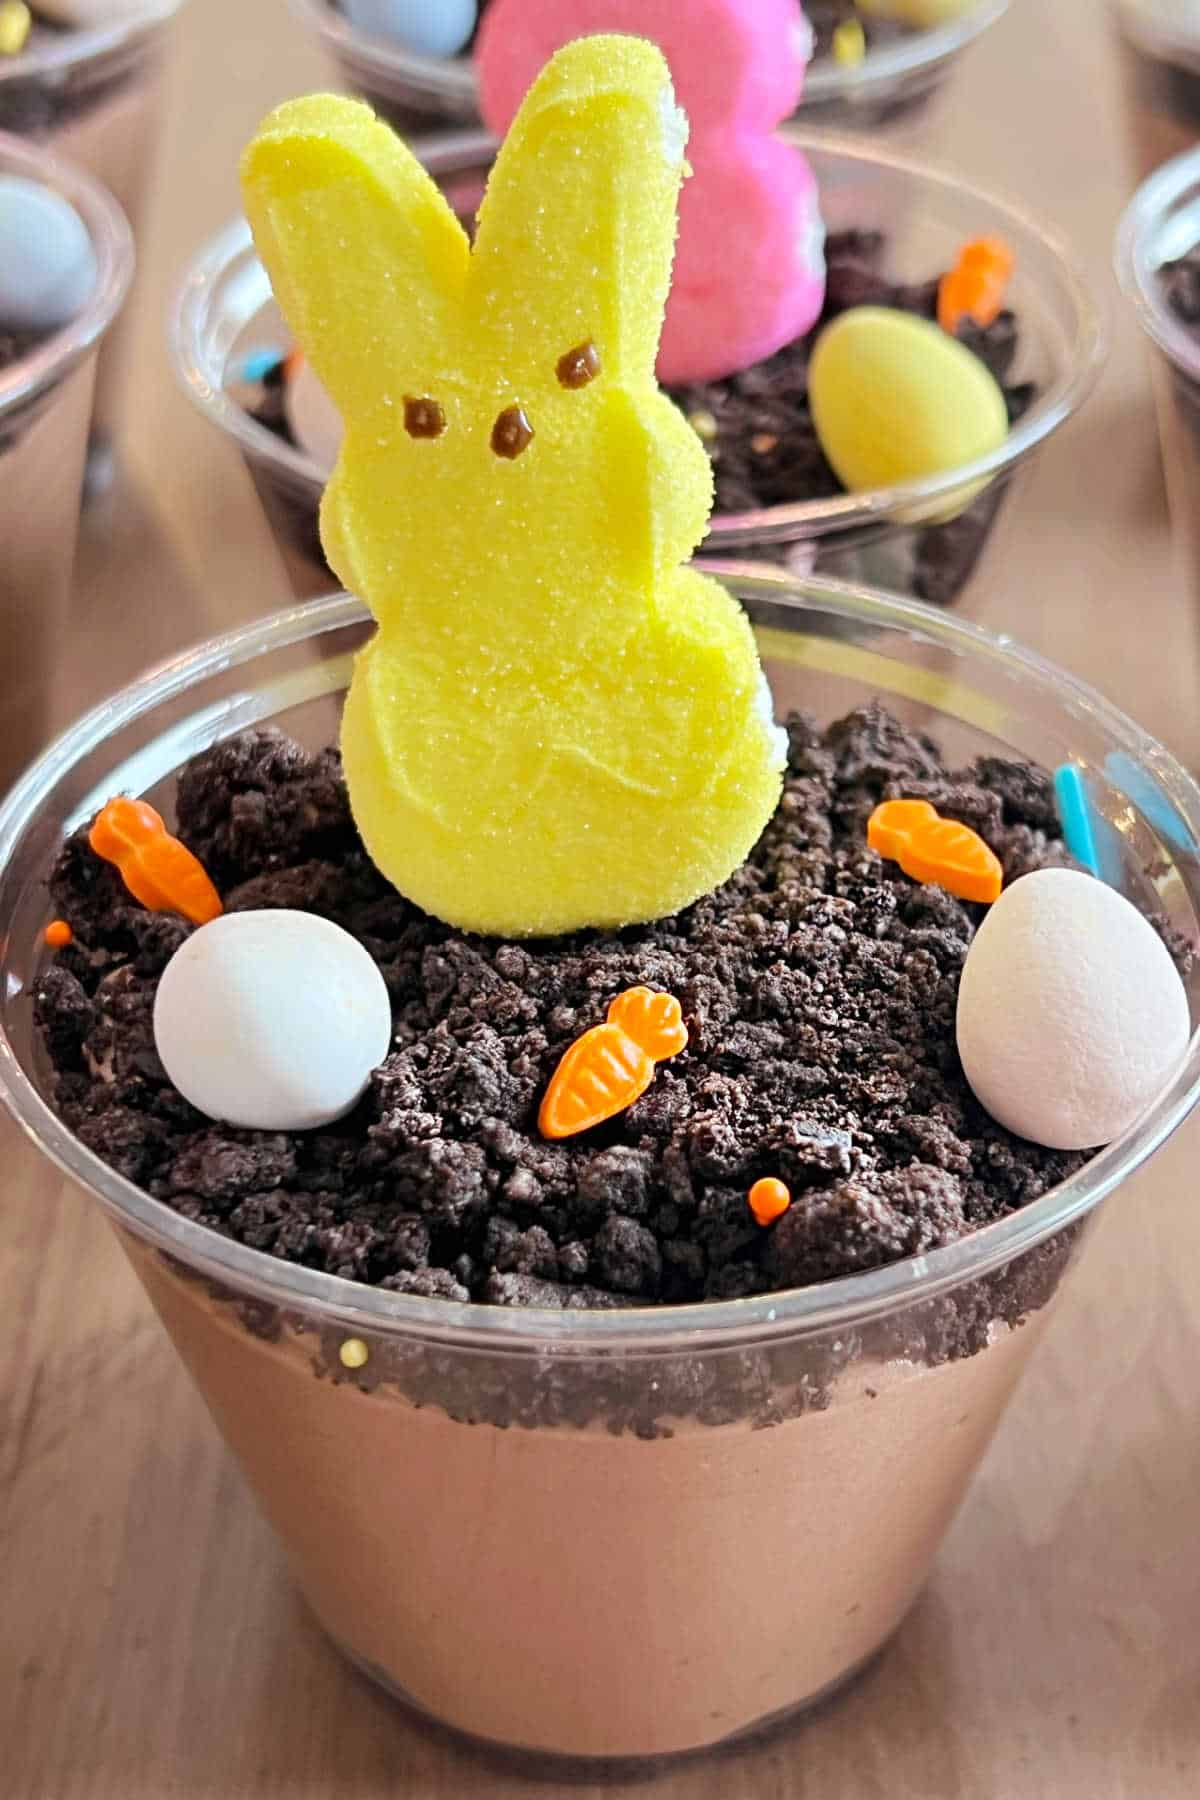 Yellow peeps bunny with candy carrots and eggs in pudding cup.